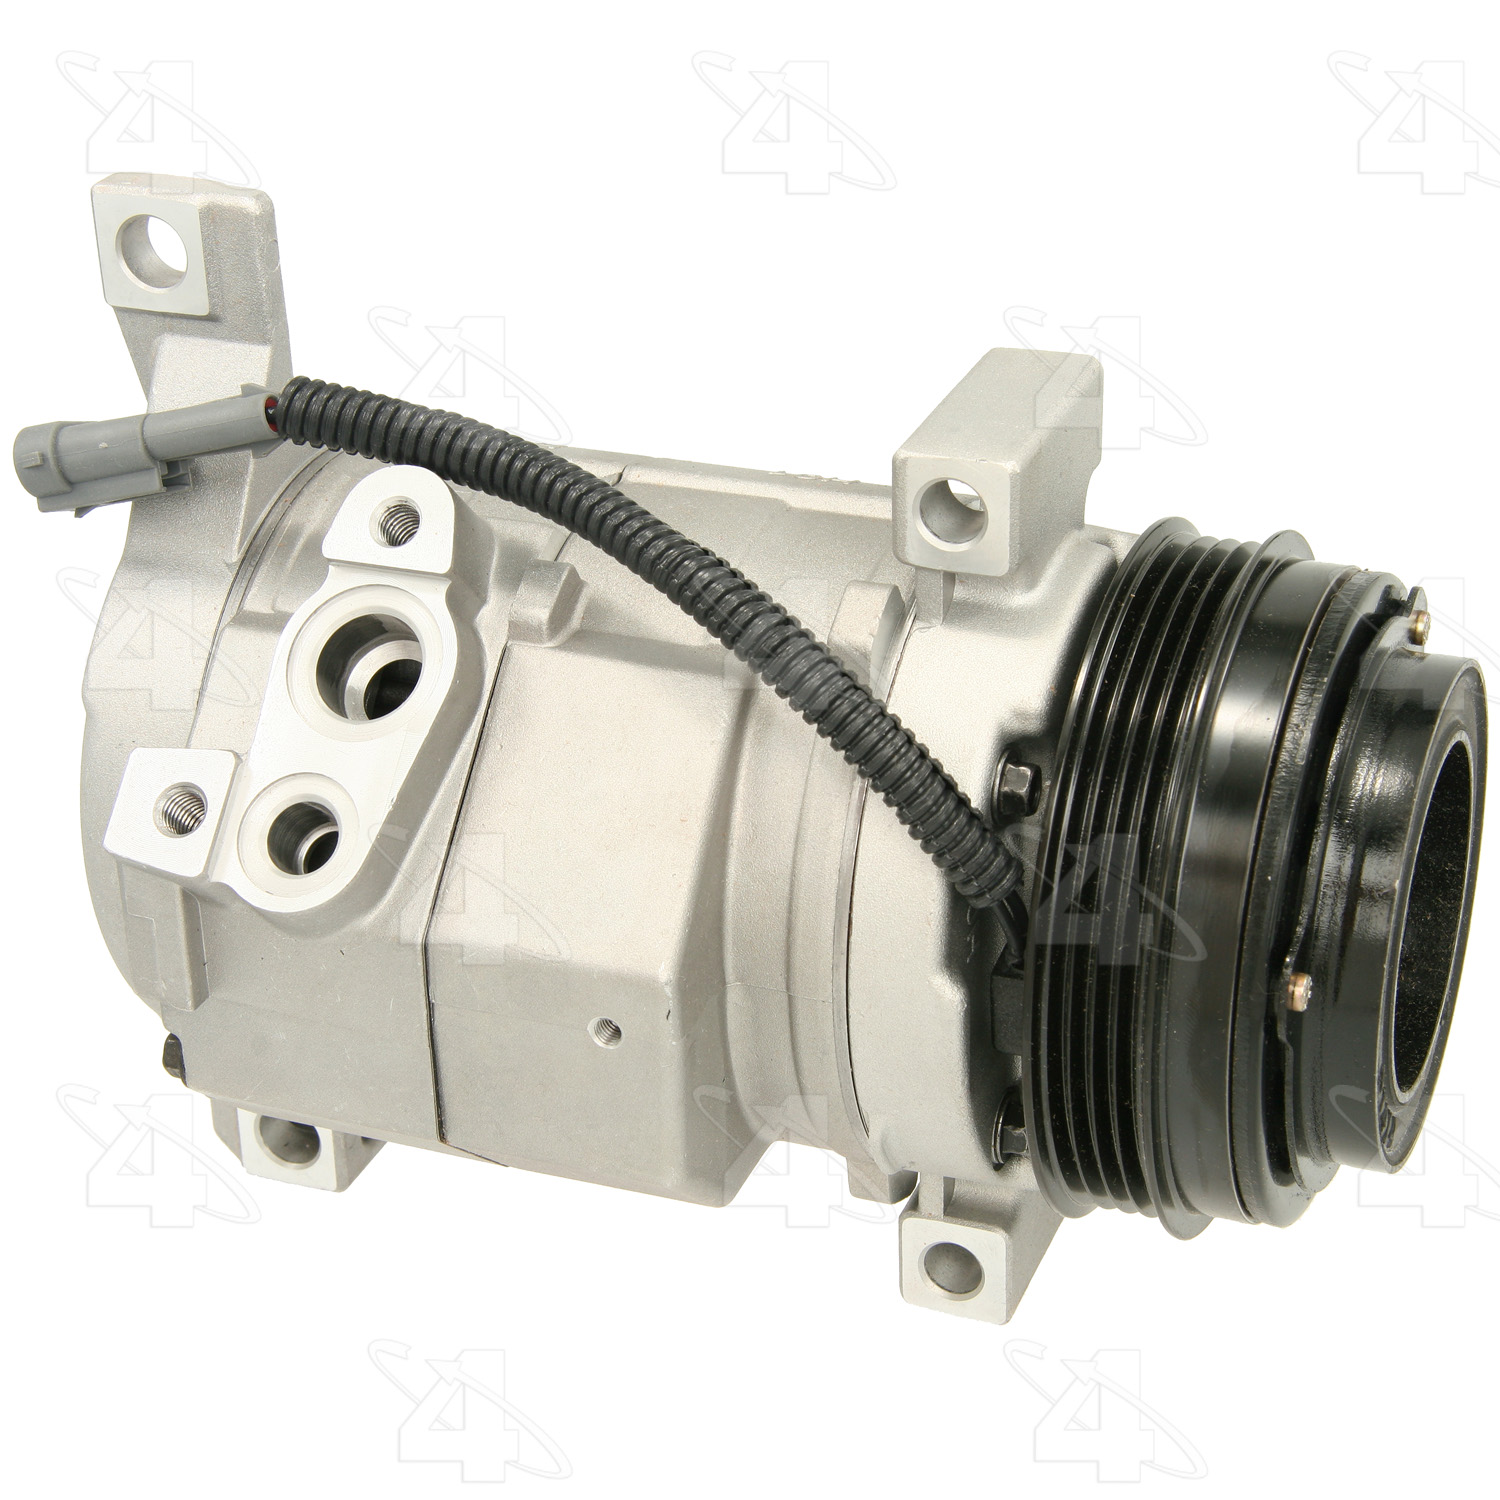 Image of ID 78377 Four Seasons 78377 A/C Compressor Fits 2003-2003 Chevrolet C3500